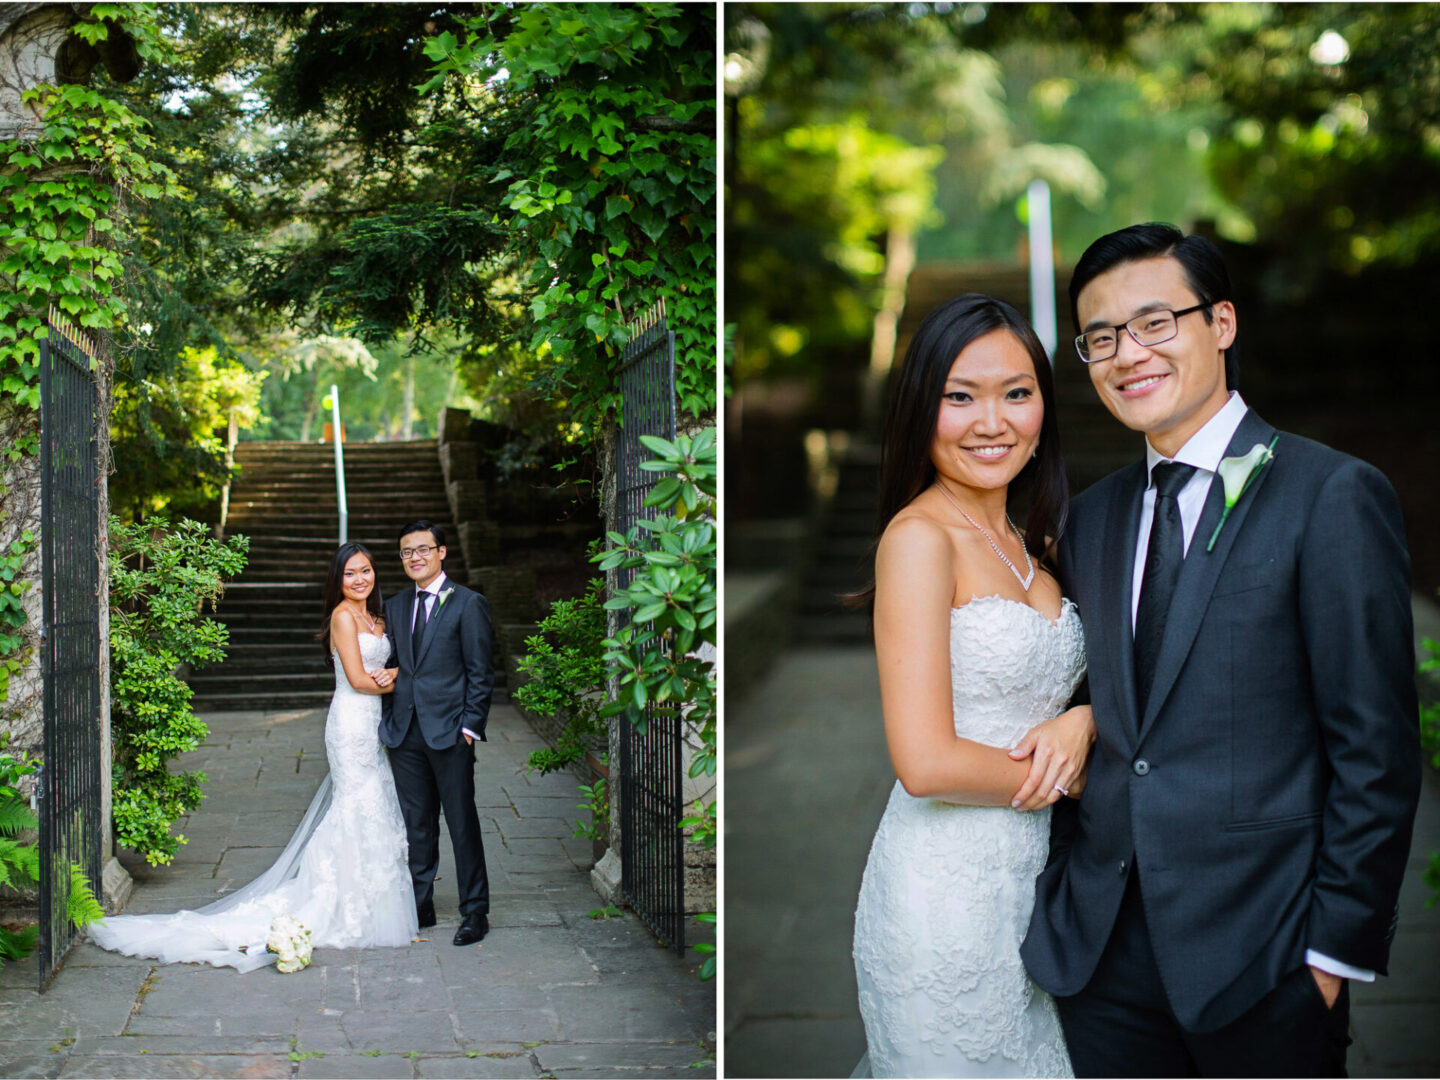 Collage image of a newly married couple standing near a gate